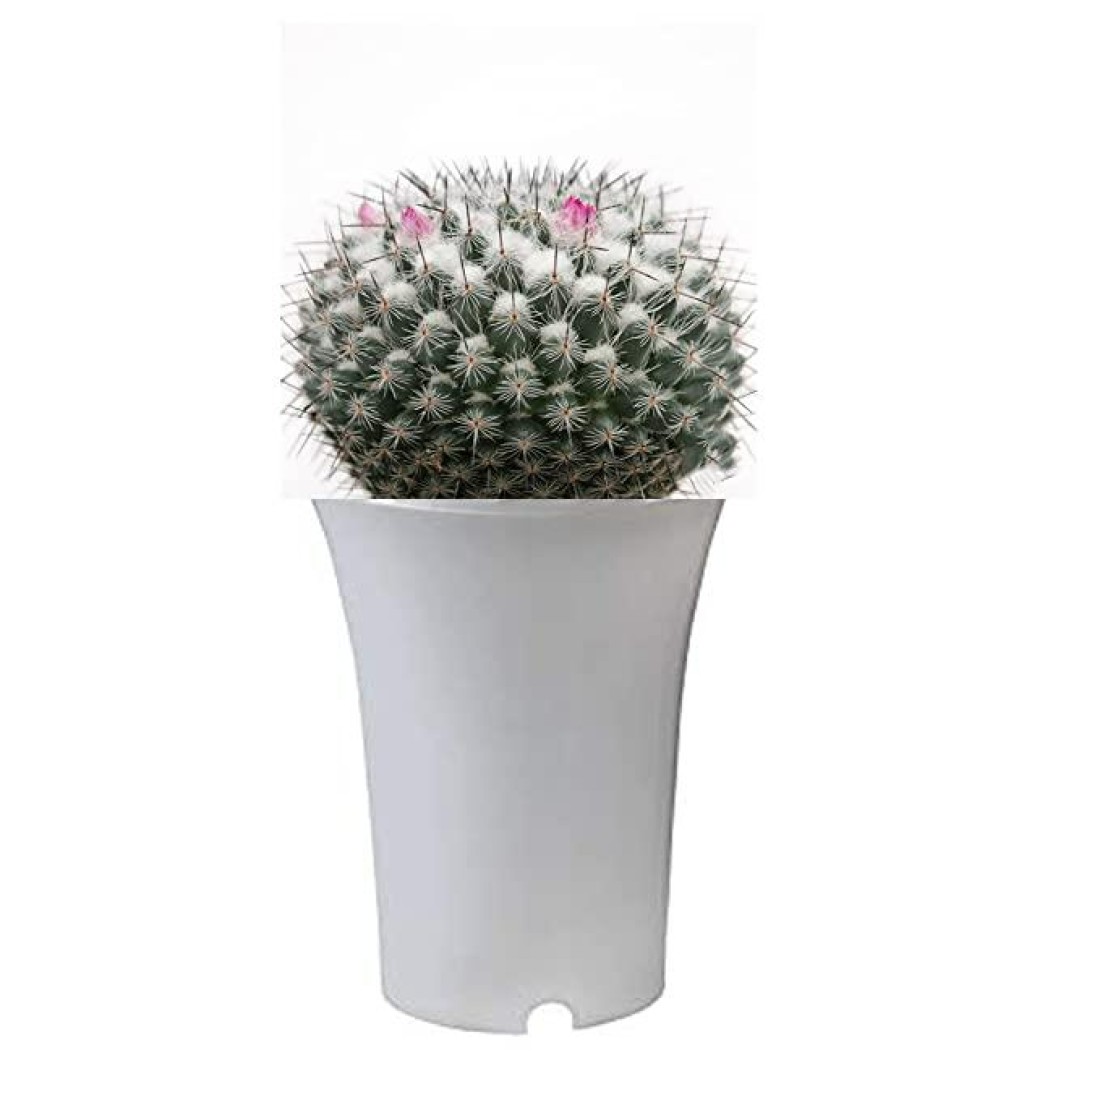 Mammillaria hahniana cactus live plant ( size 3 inches) flowering size 1